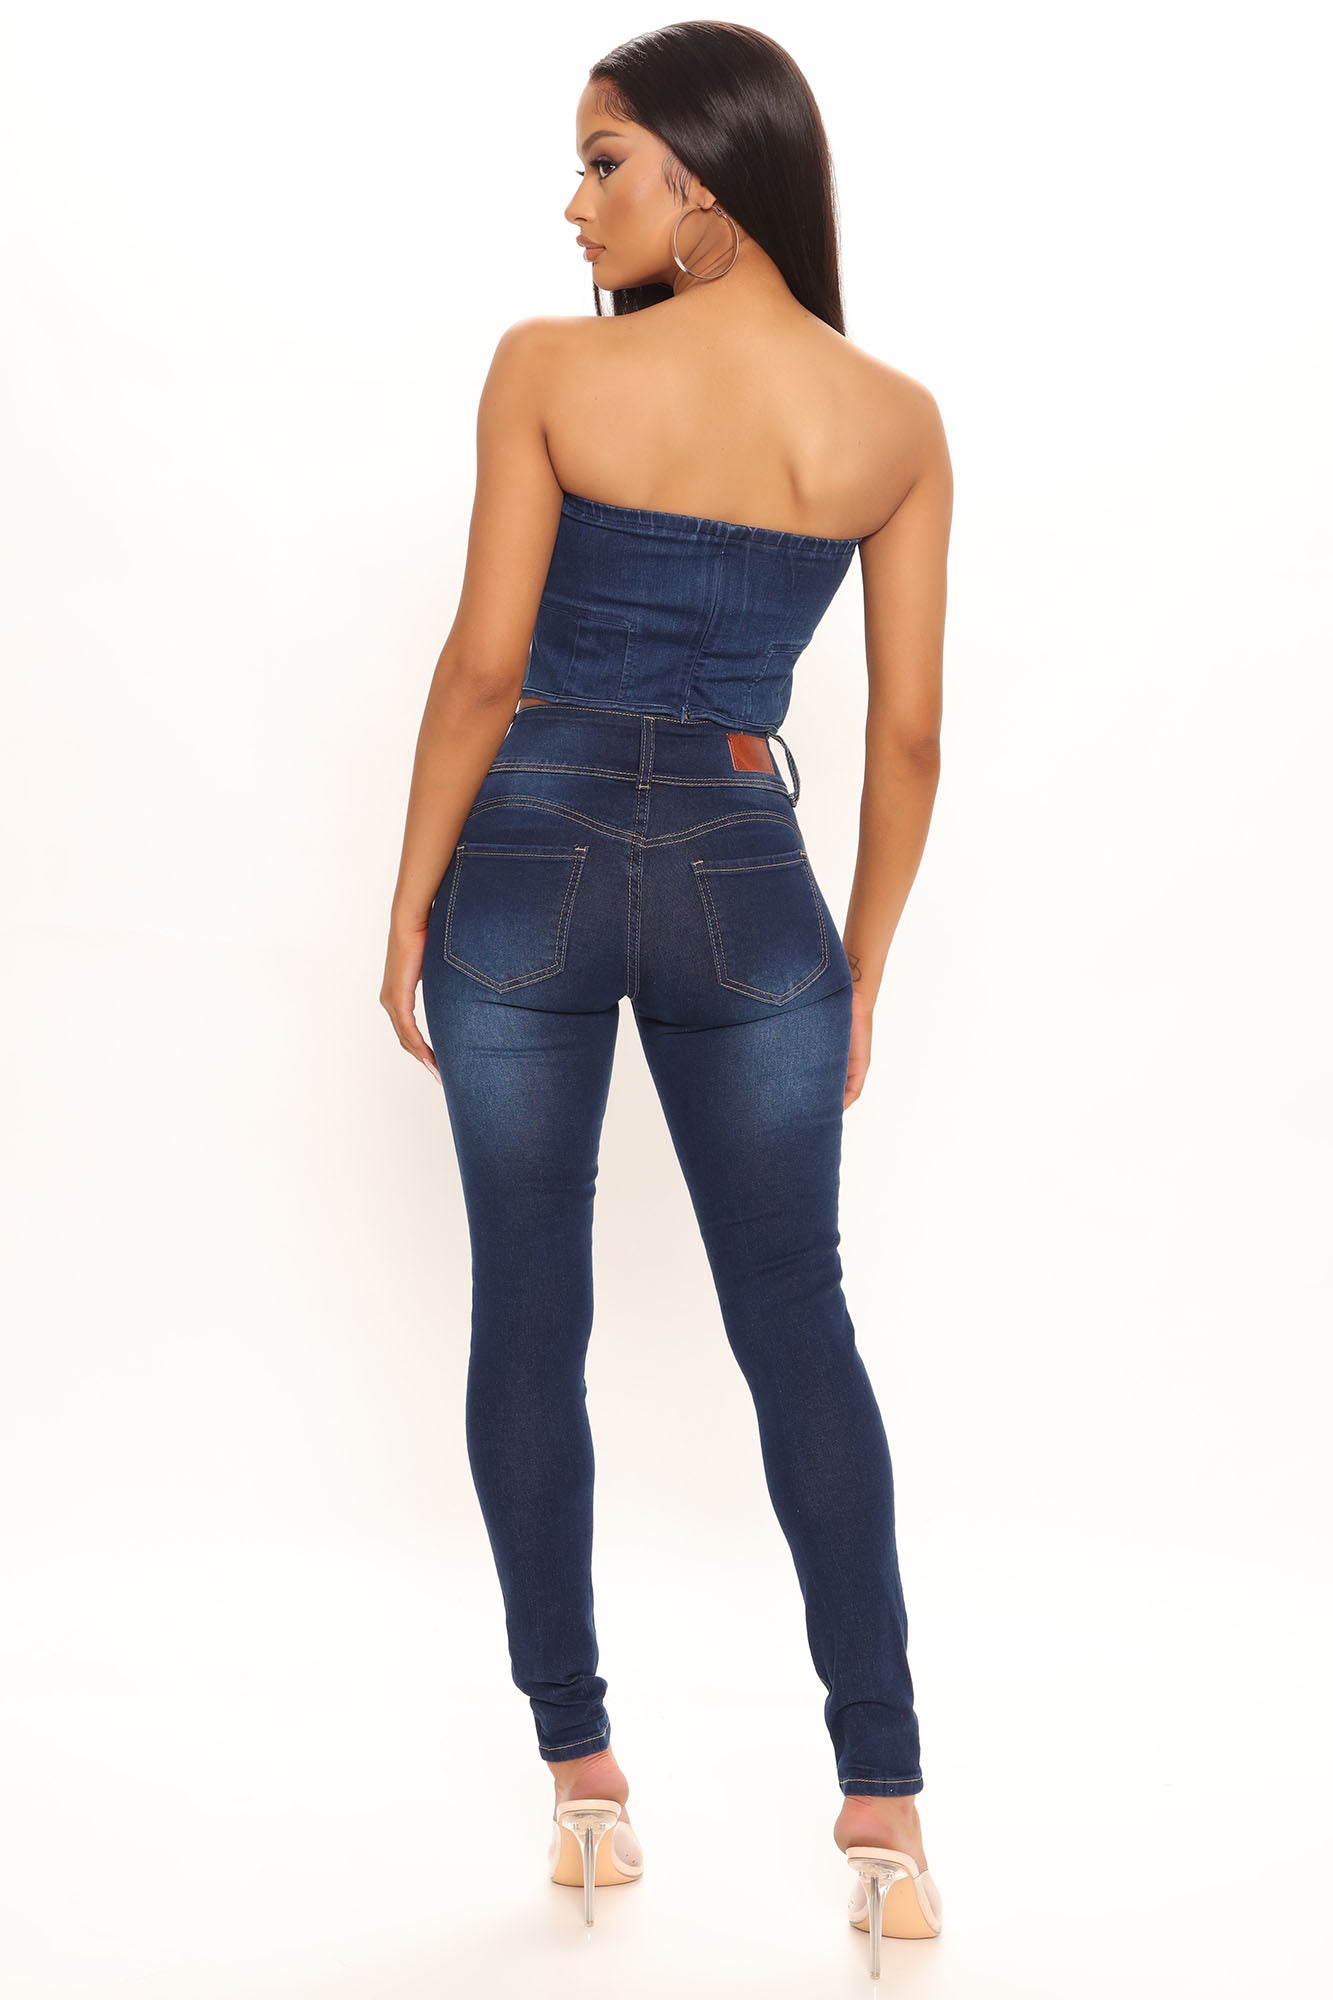 All The Moves Booty Shaping Skinny Jeans - Dark Wash